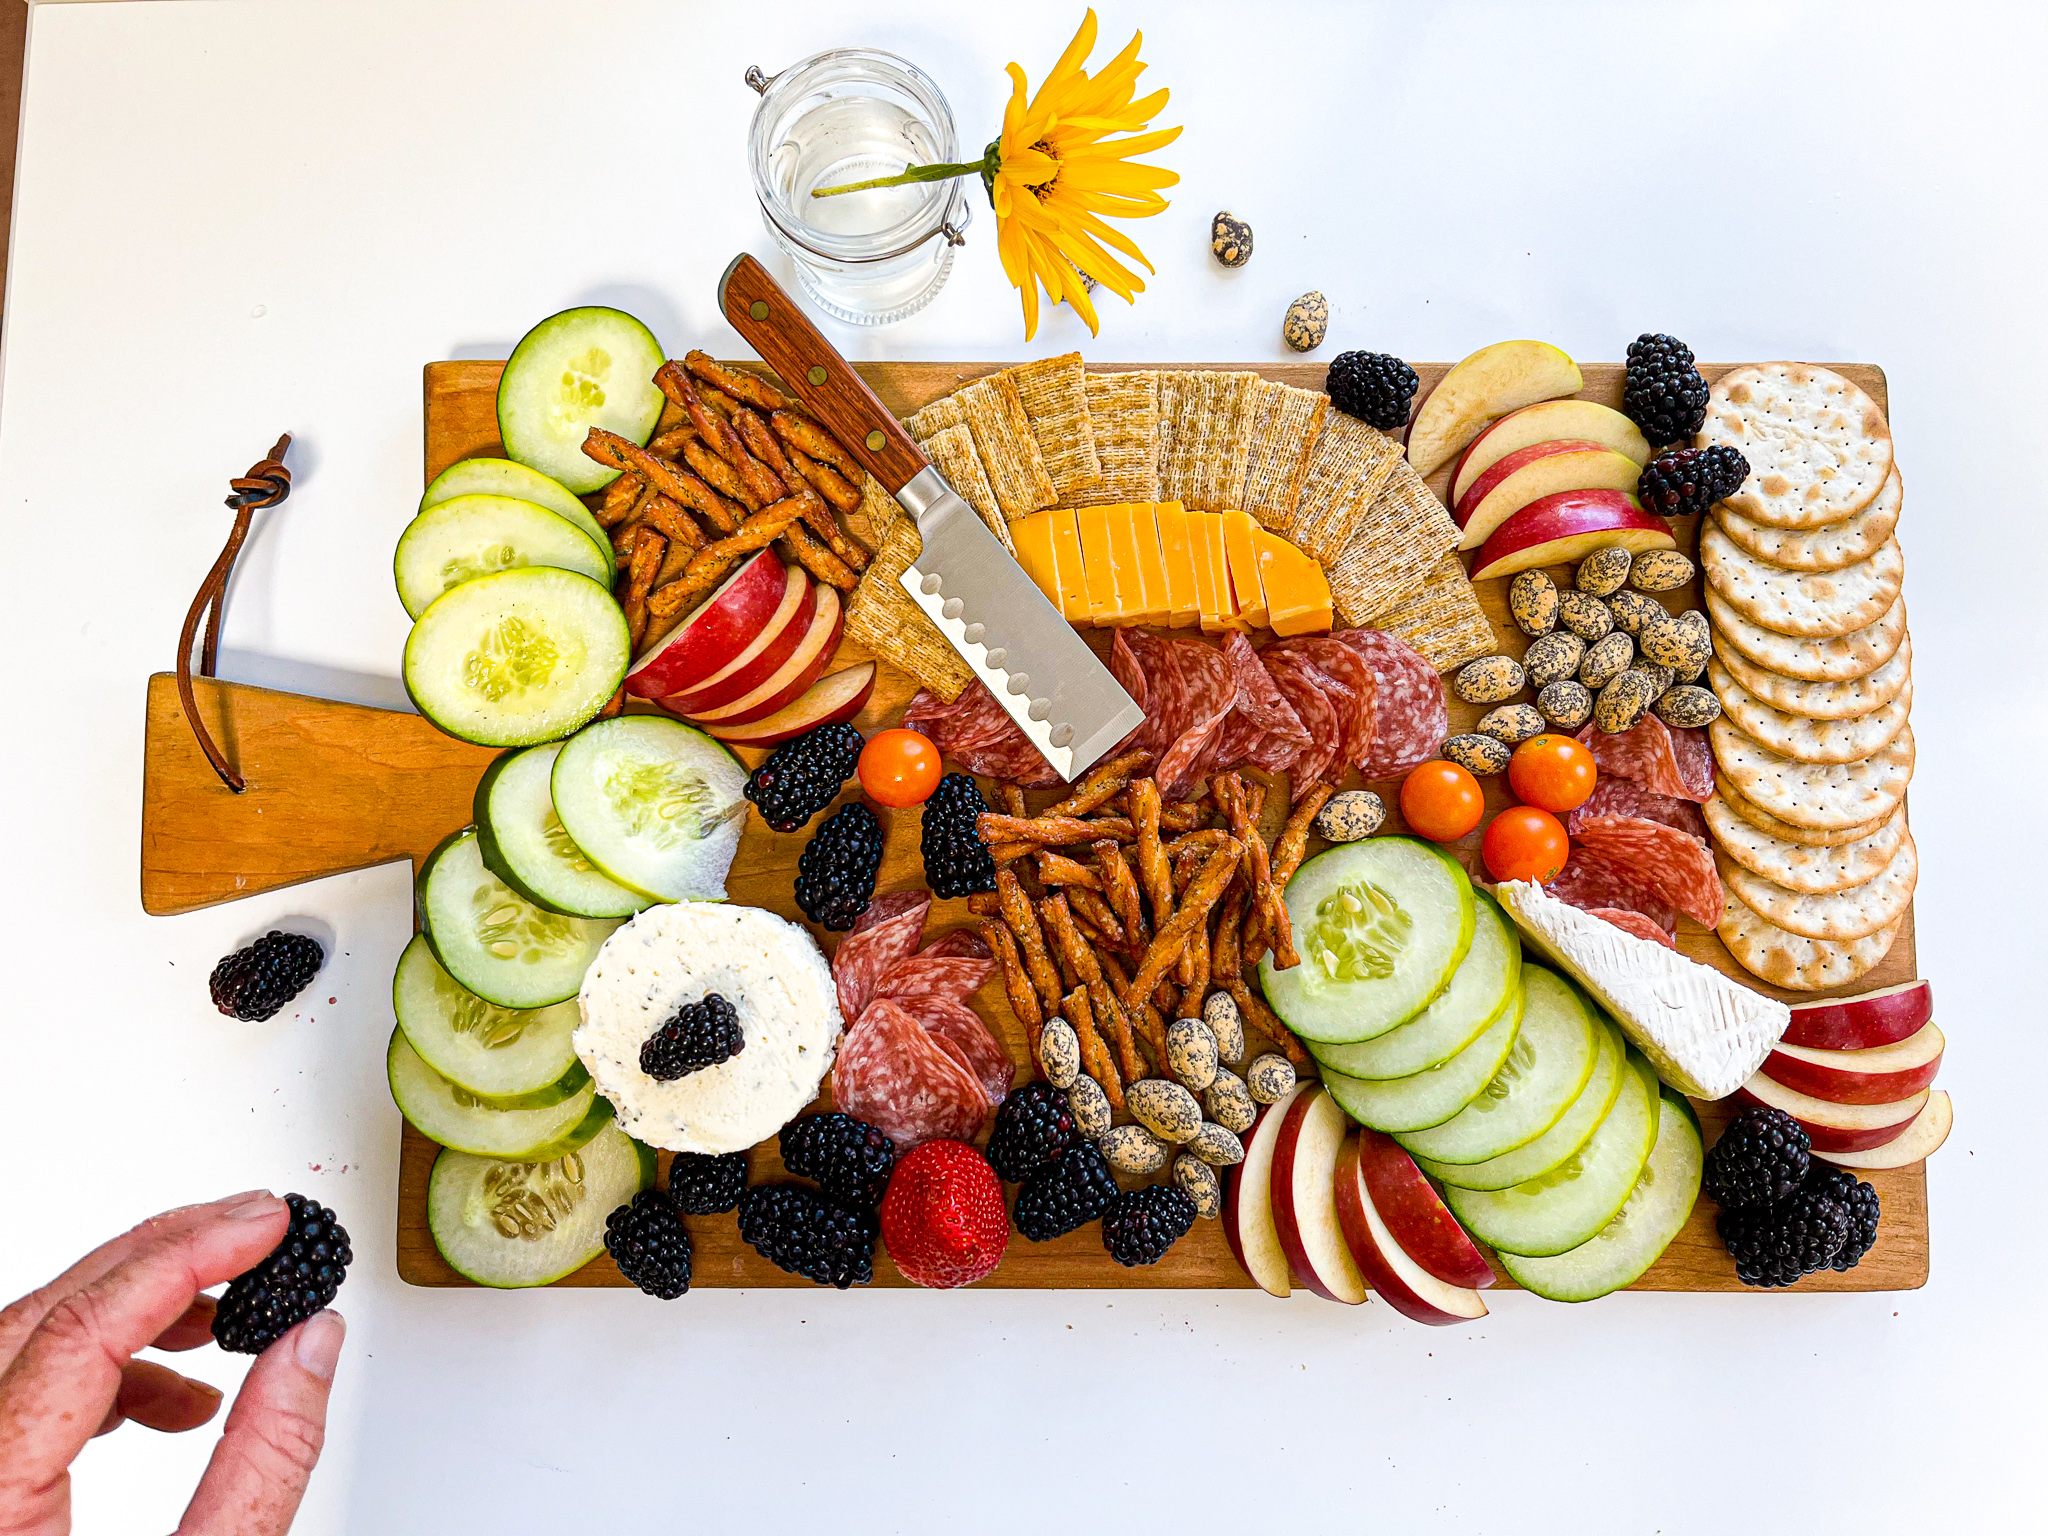 Table long charcuterie board on butcher paper  Healthy recipes easy  snacks, Charcuterie inspiration, Charcuterie recipes